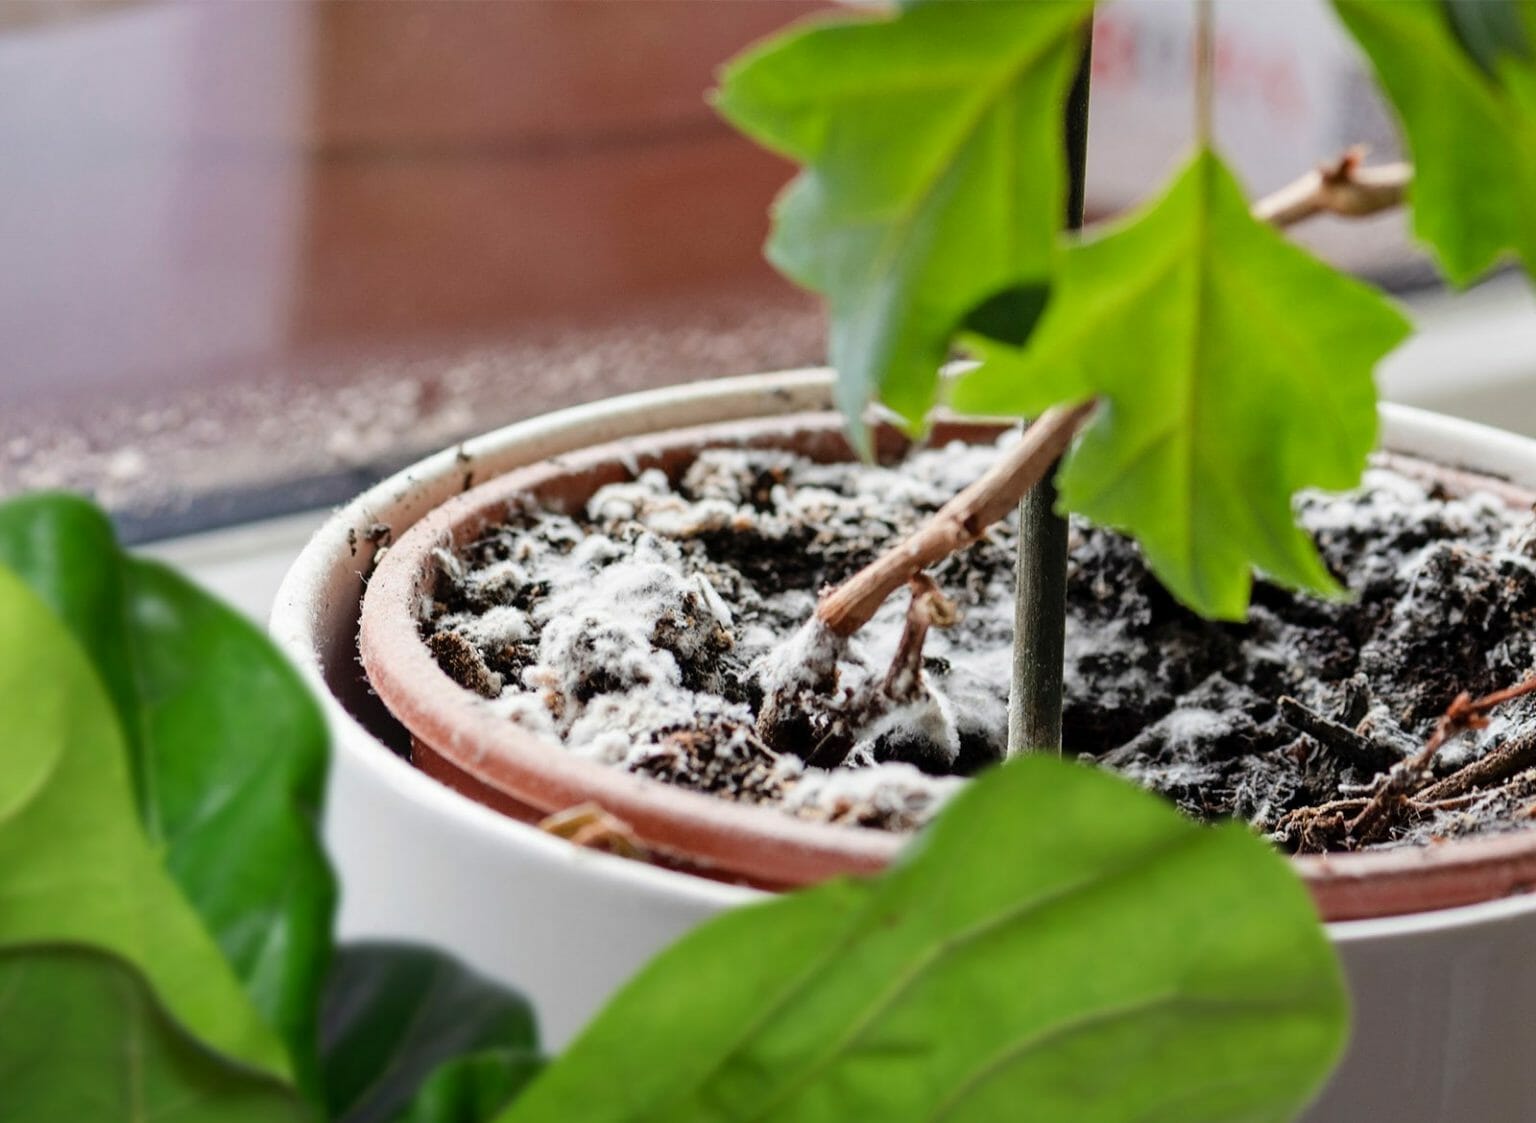 How To Get Rid Of Mold On Top Of Plant Soil Grow Your Yard